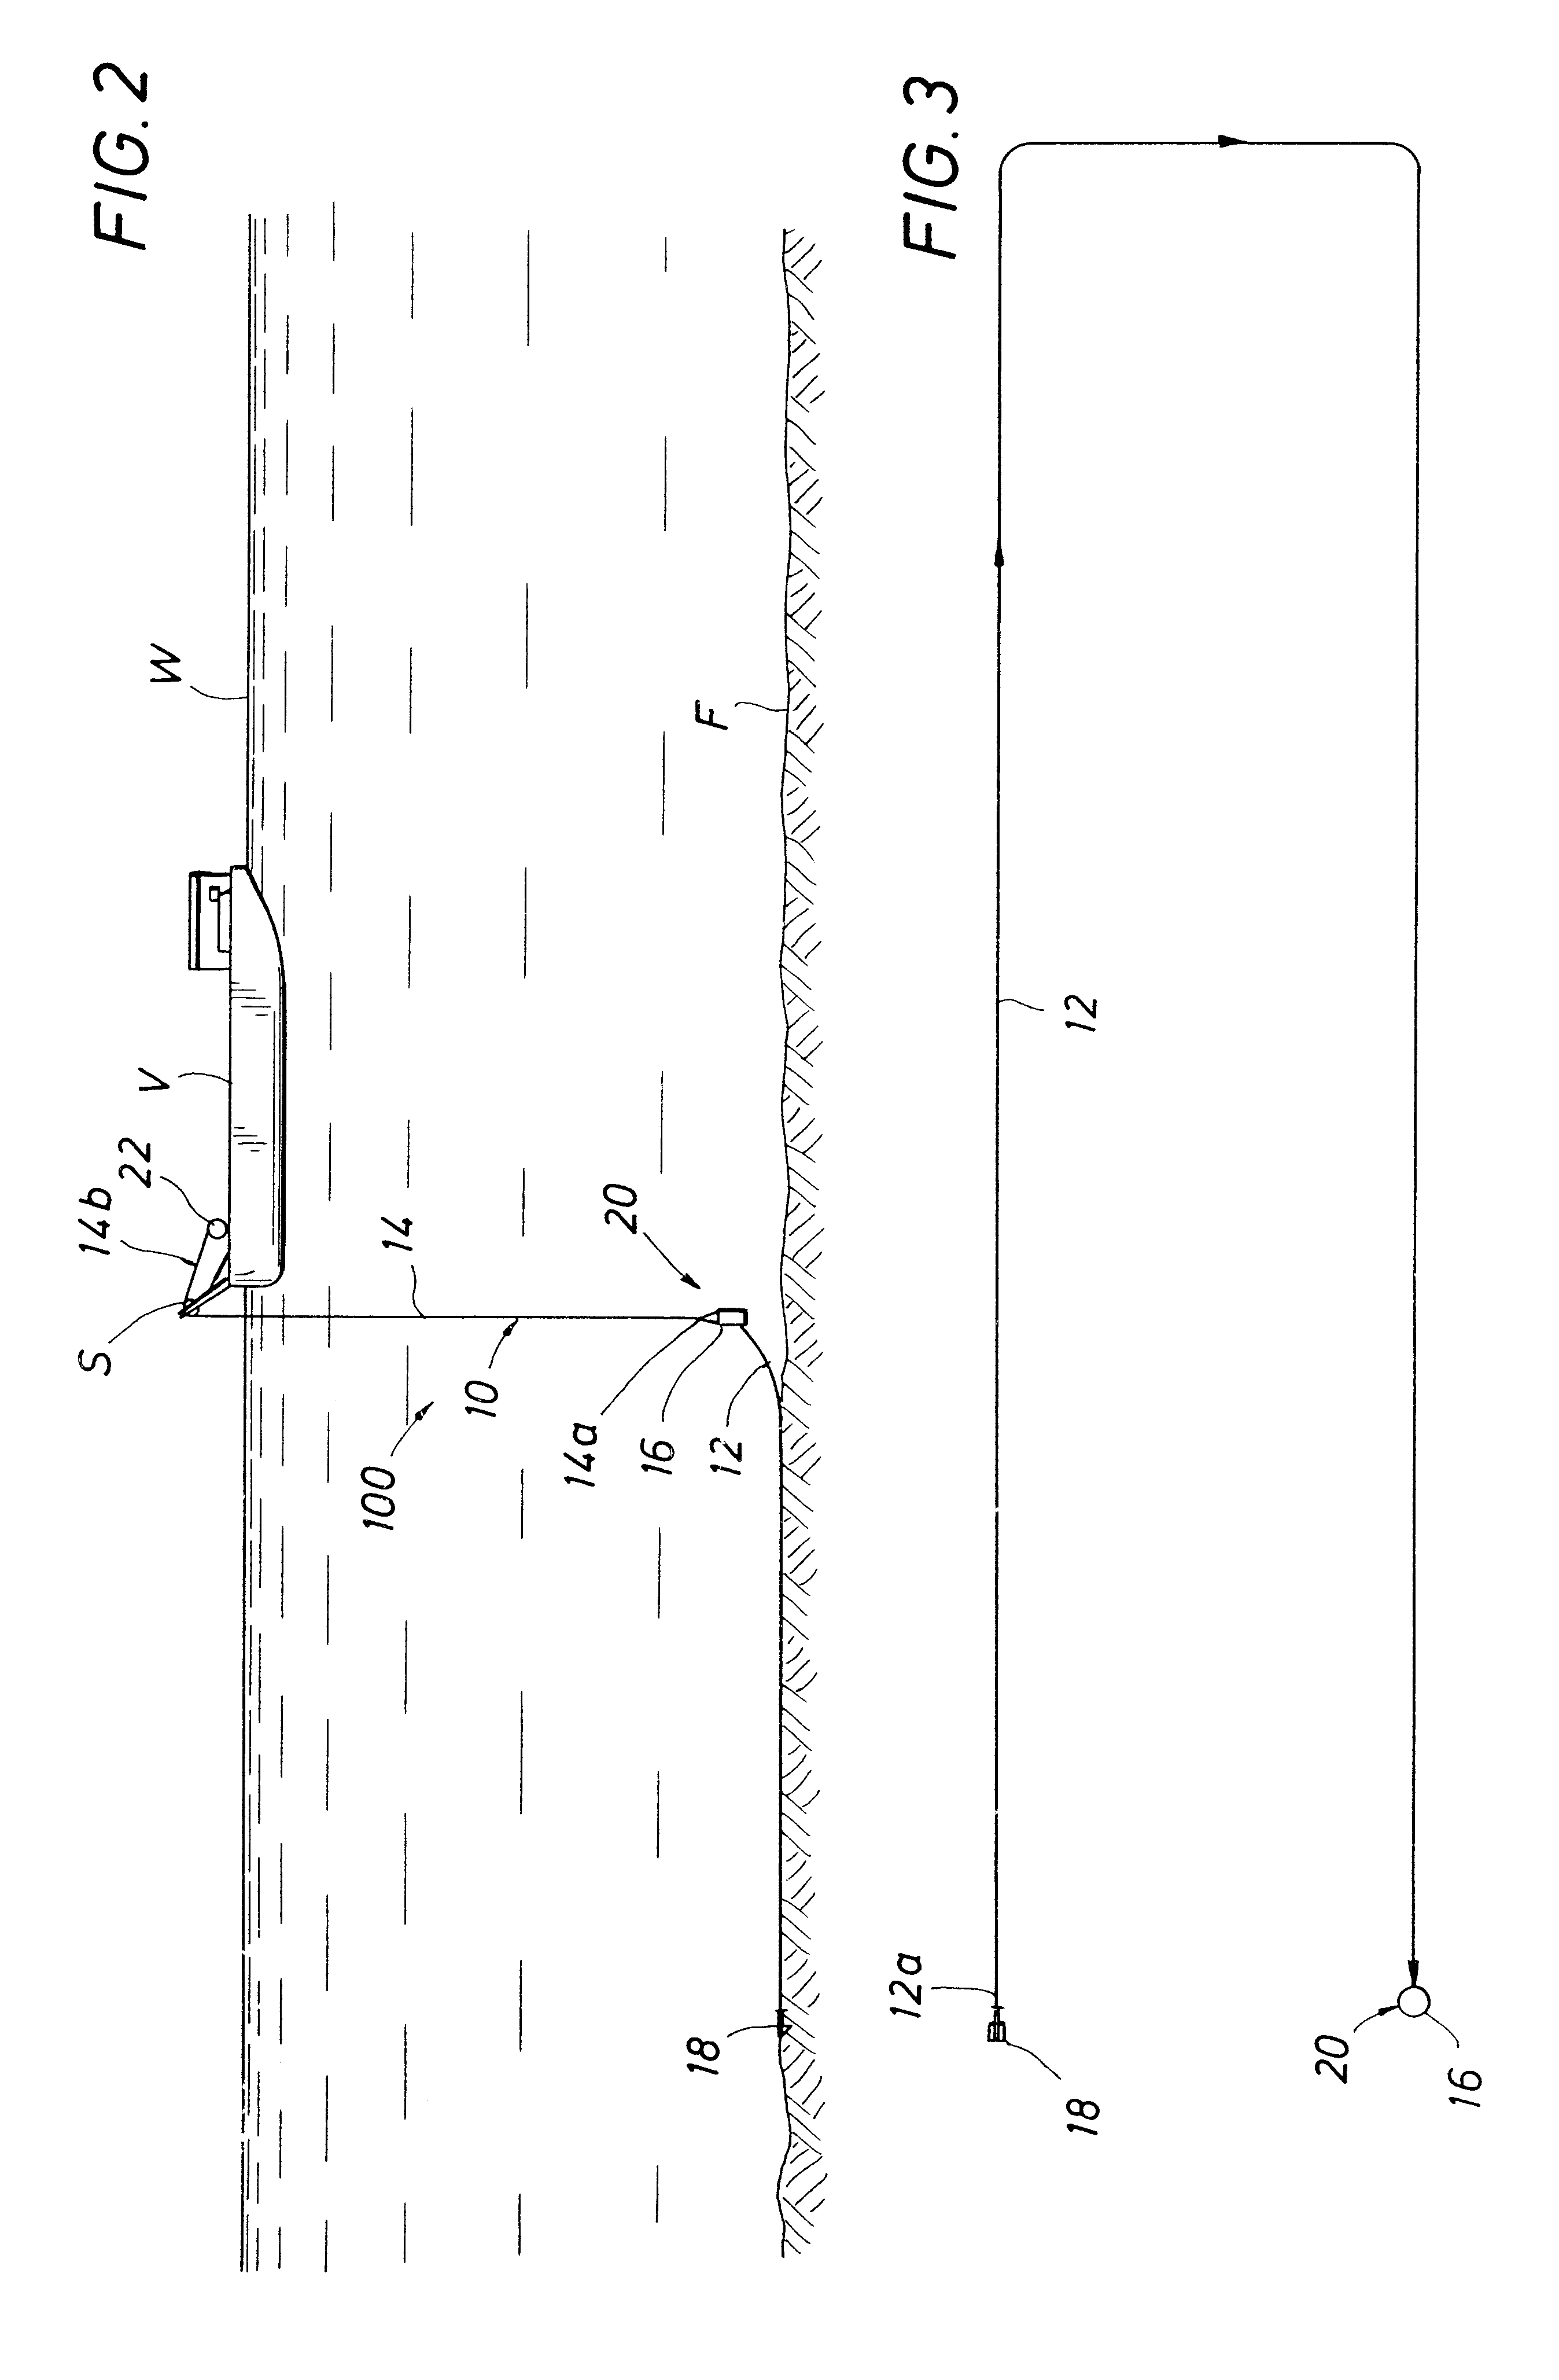 Cable deployment system and method of using same